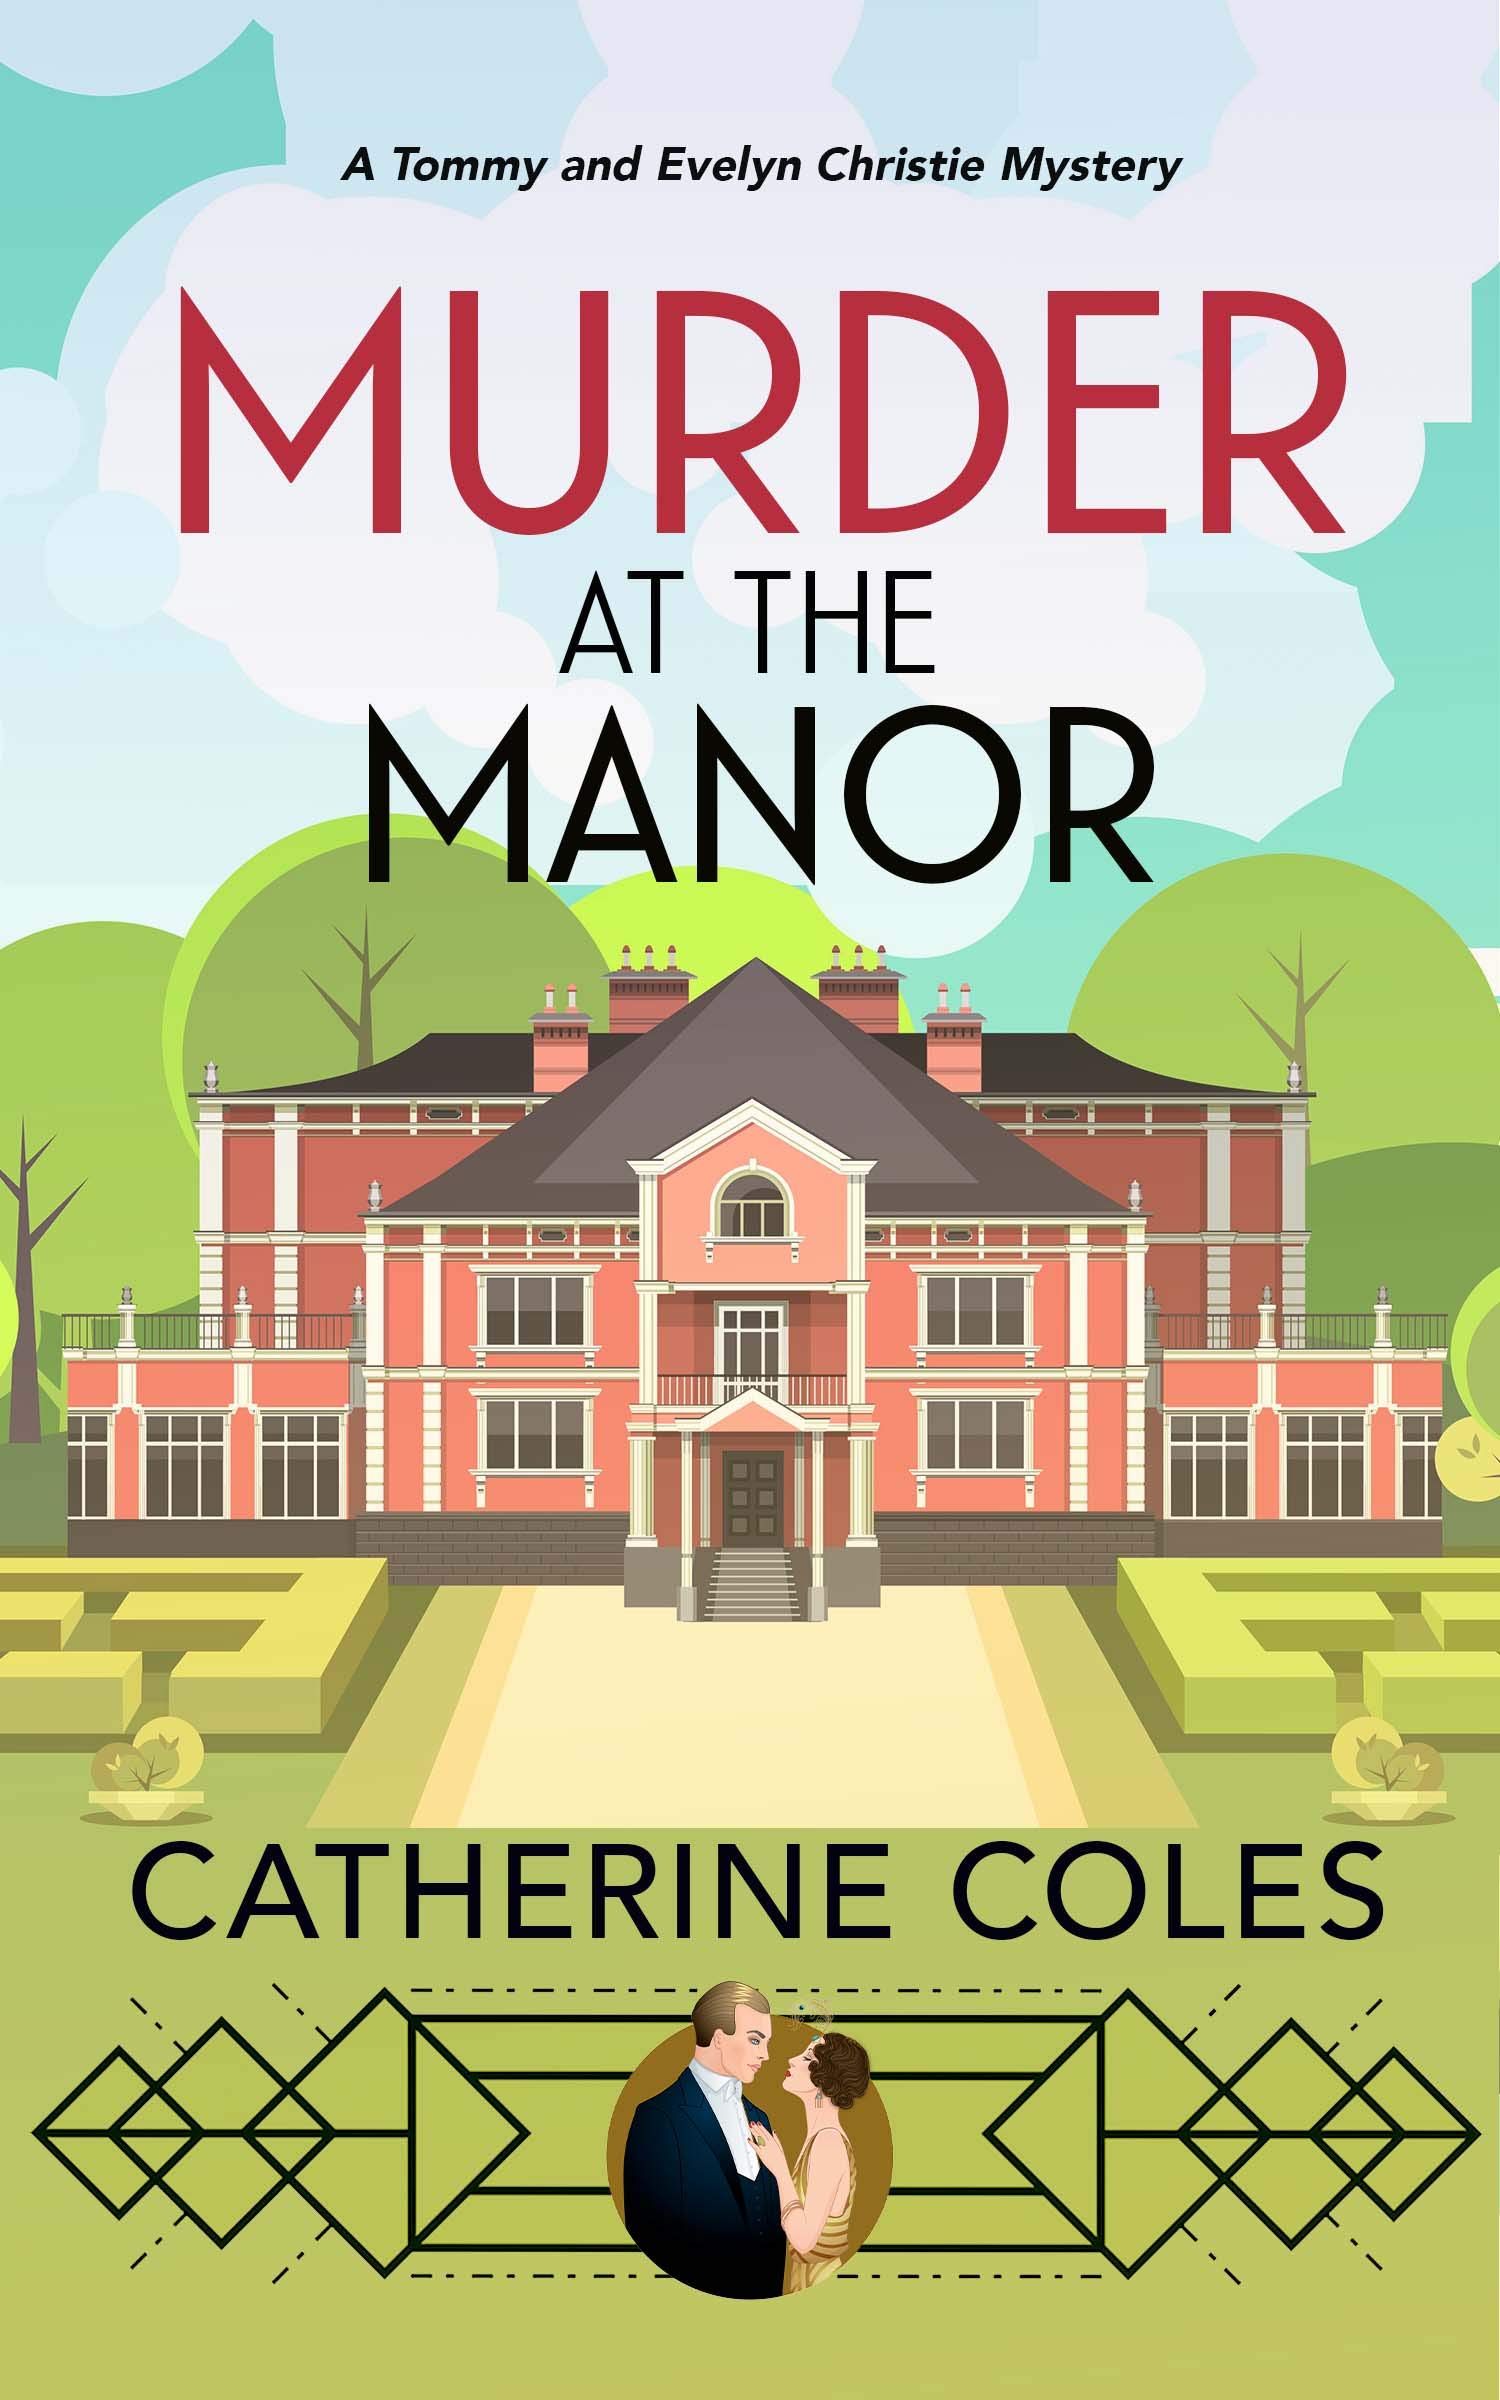 #BookReview MURDER AT THE MANOR (Tommy and Evelyn Christie #1) by
Catherine Coles #periodcozymystery #cozymystery